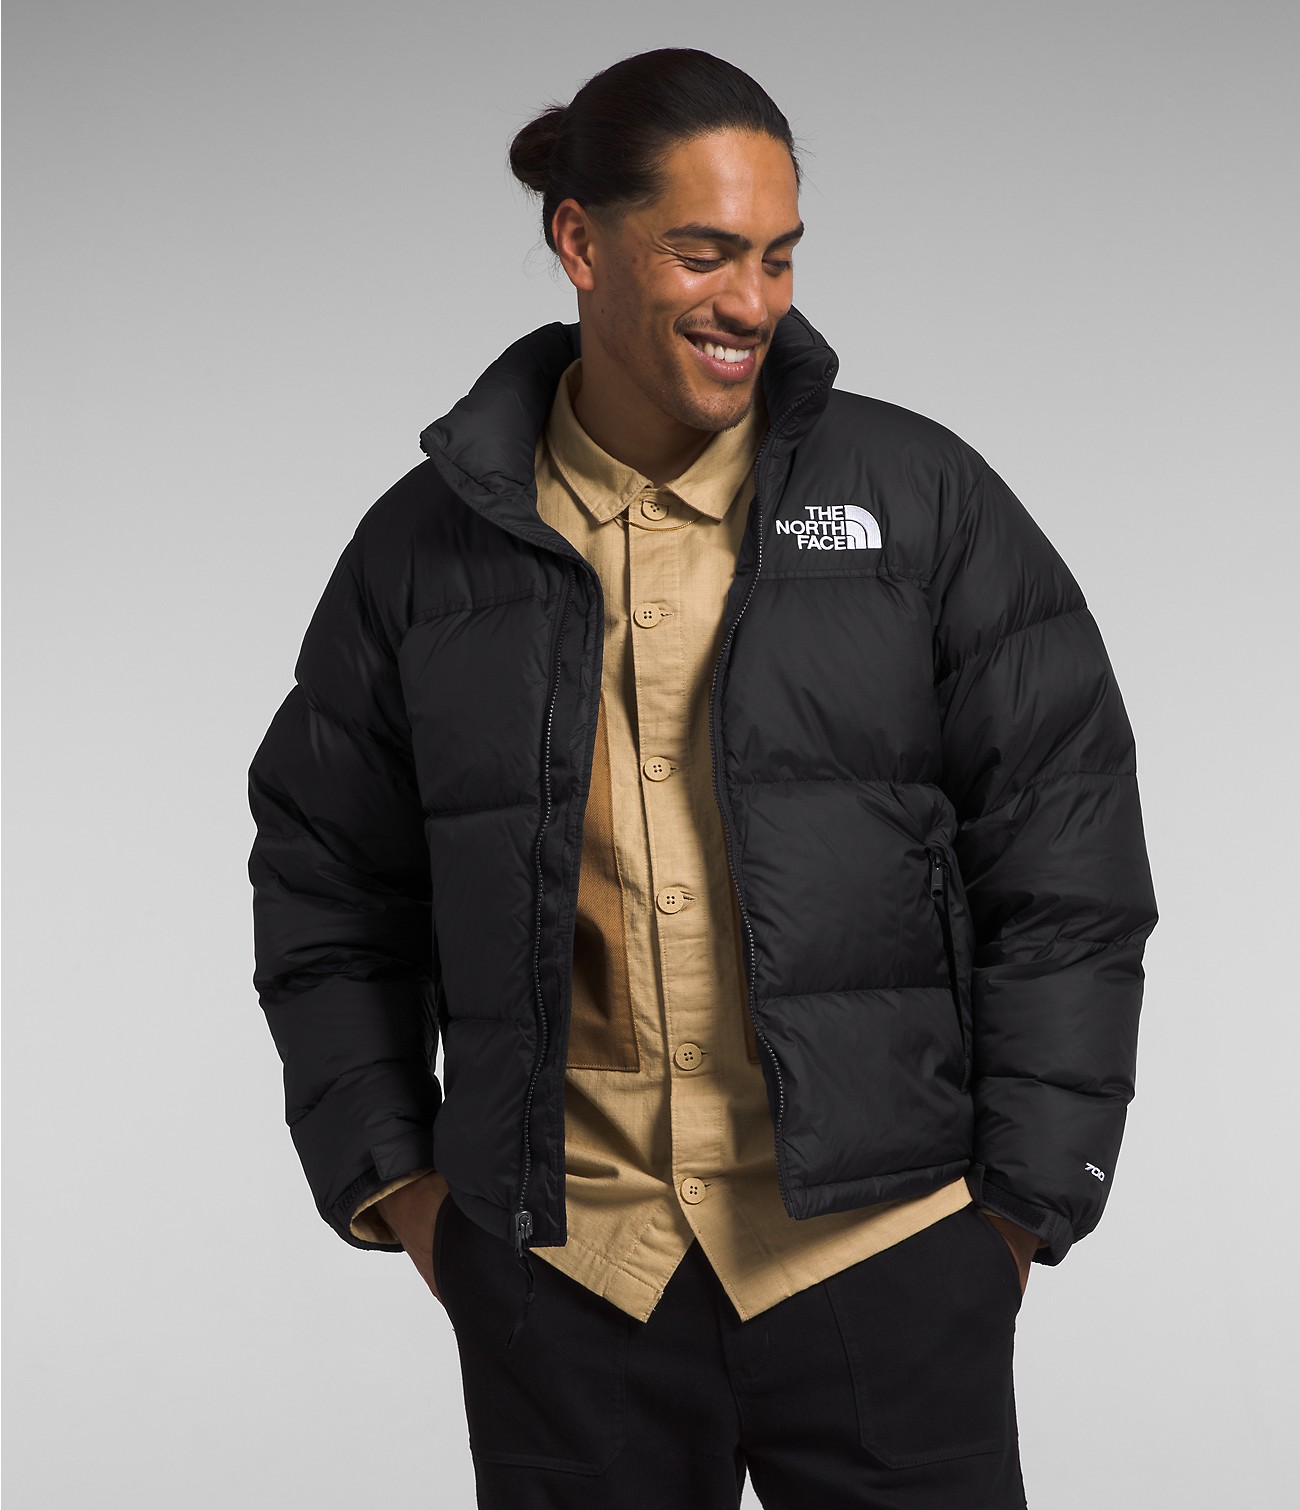 Unlock Wilderness' choice in the Nike Vs North Face comparison, the 1996 Retro Nuptse Jacket by The North Face